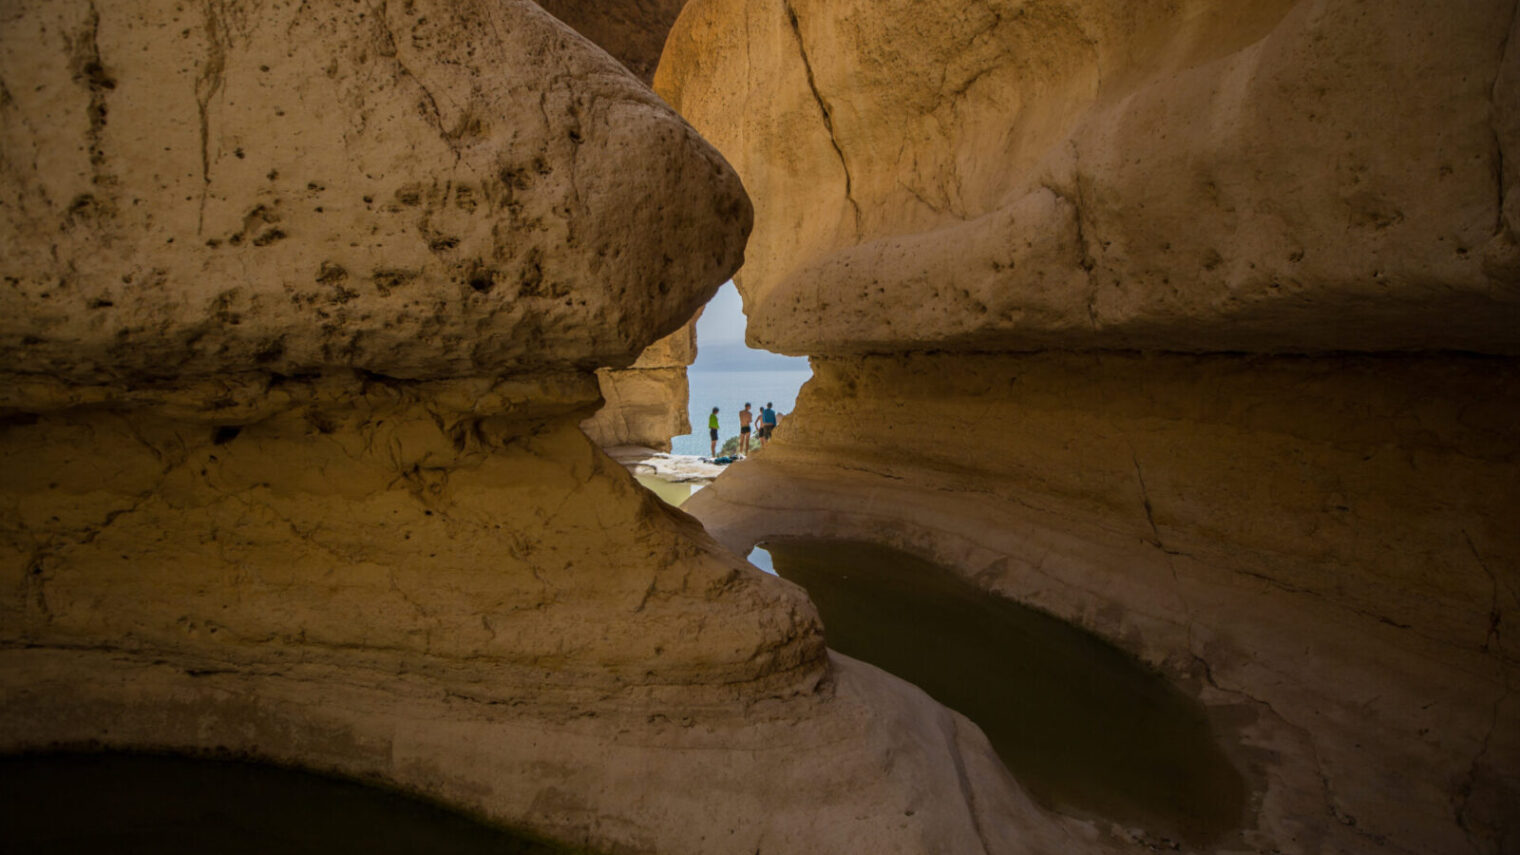 The "window fall", a canyon on one of the hiking trails in Ein Gedi. Photo by Maor Kinsbursky/Flash90